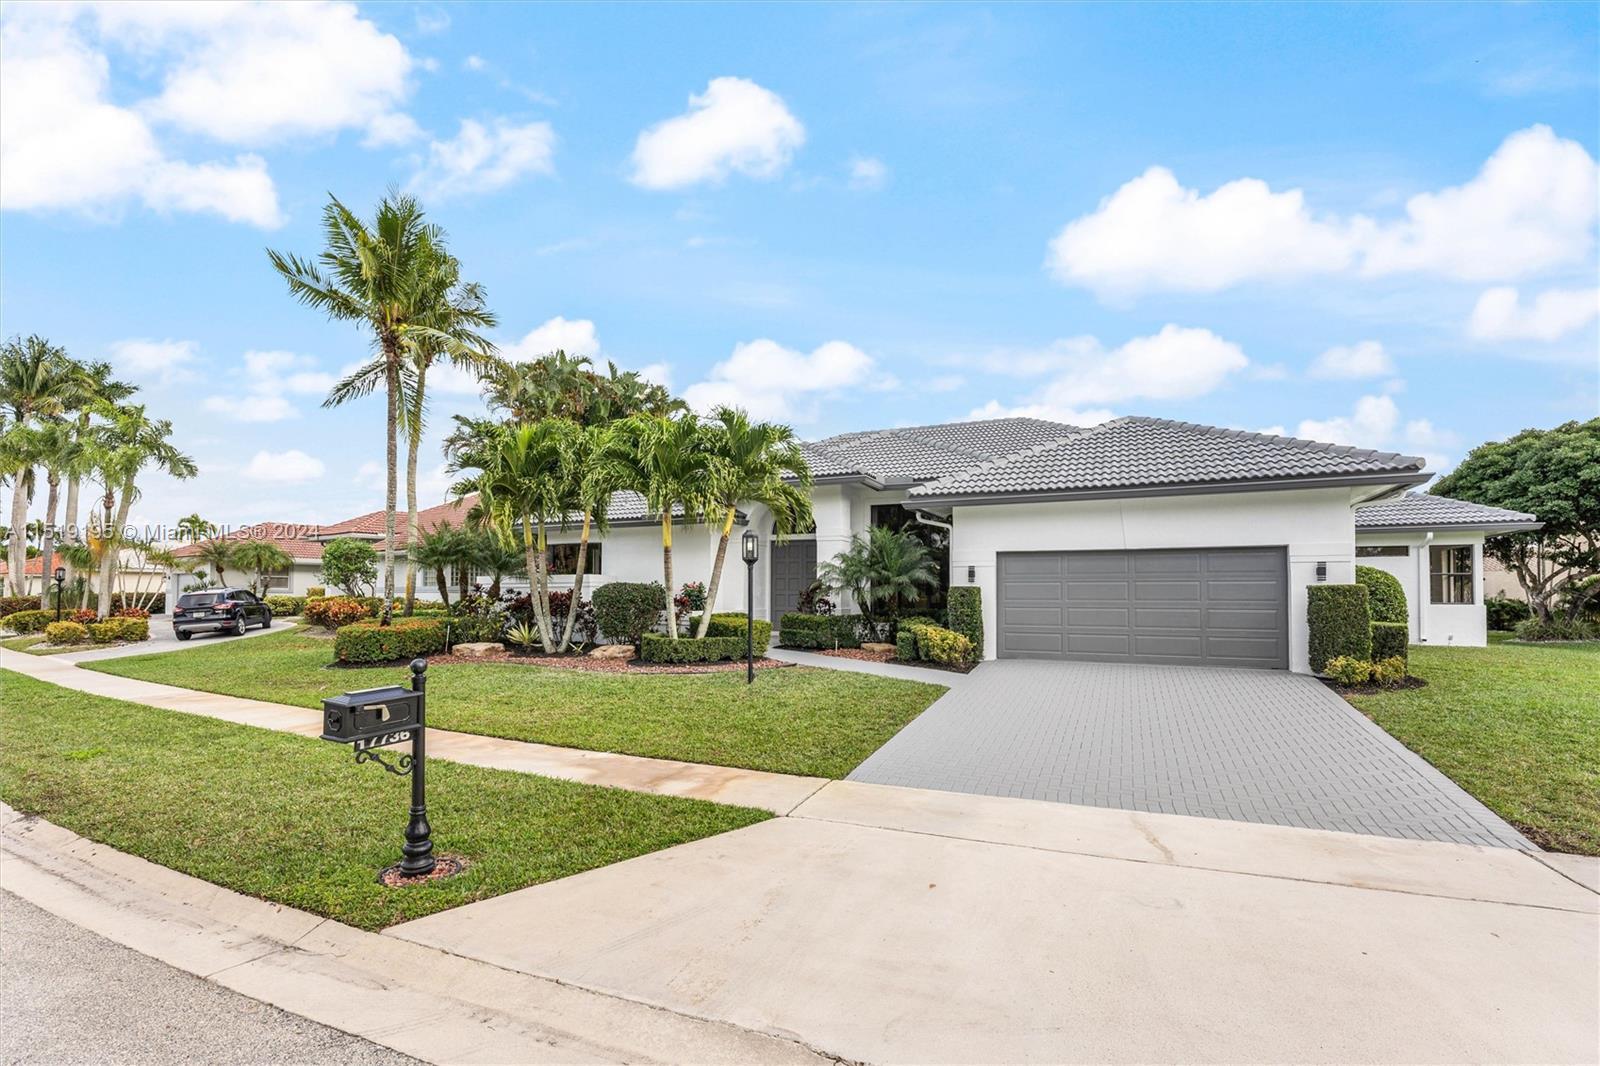 Stonebridge country club in West Boca Raton fully remodeled and stunning 4 bedroom showcase home wit